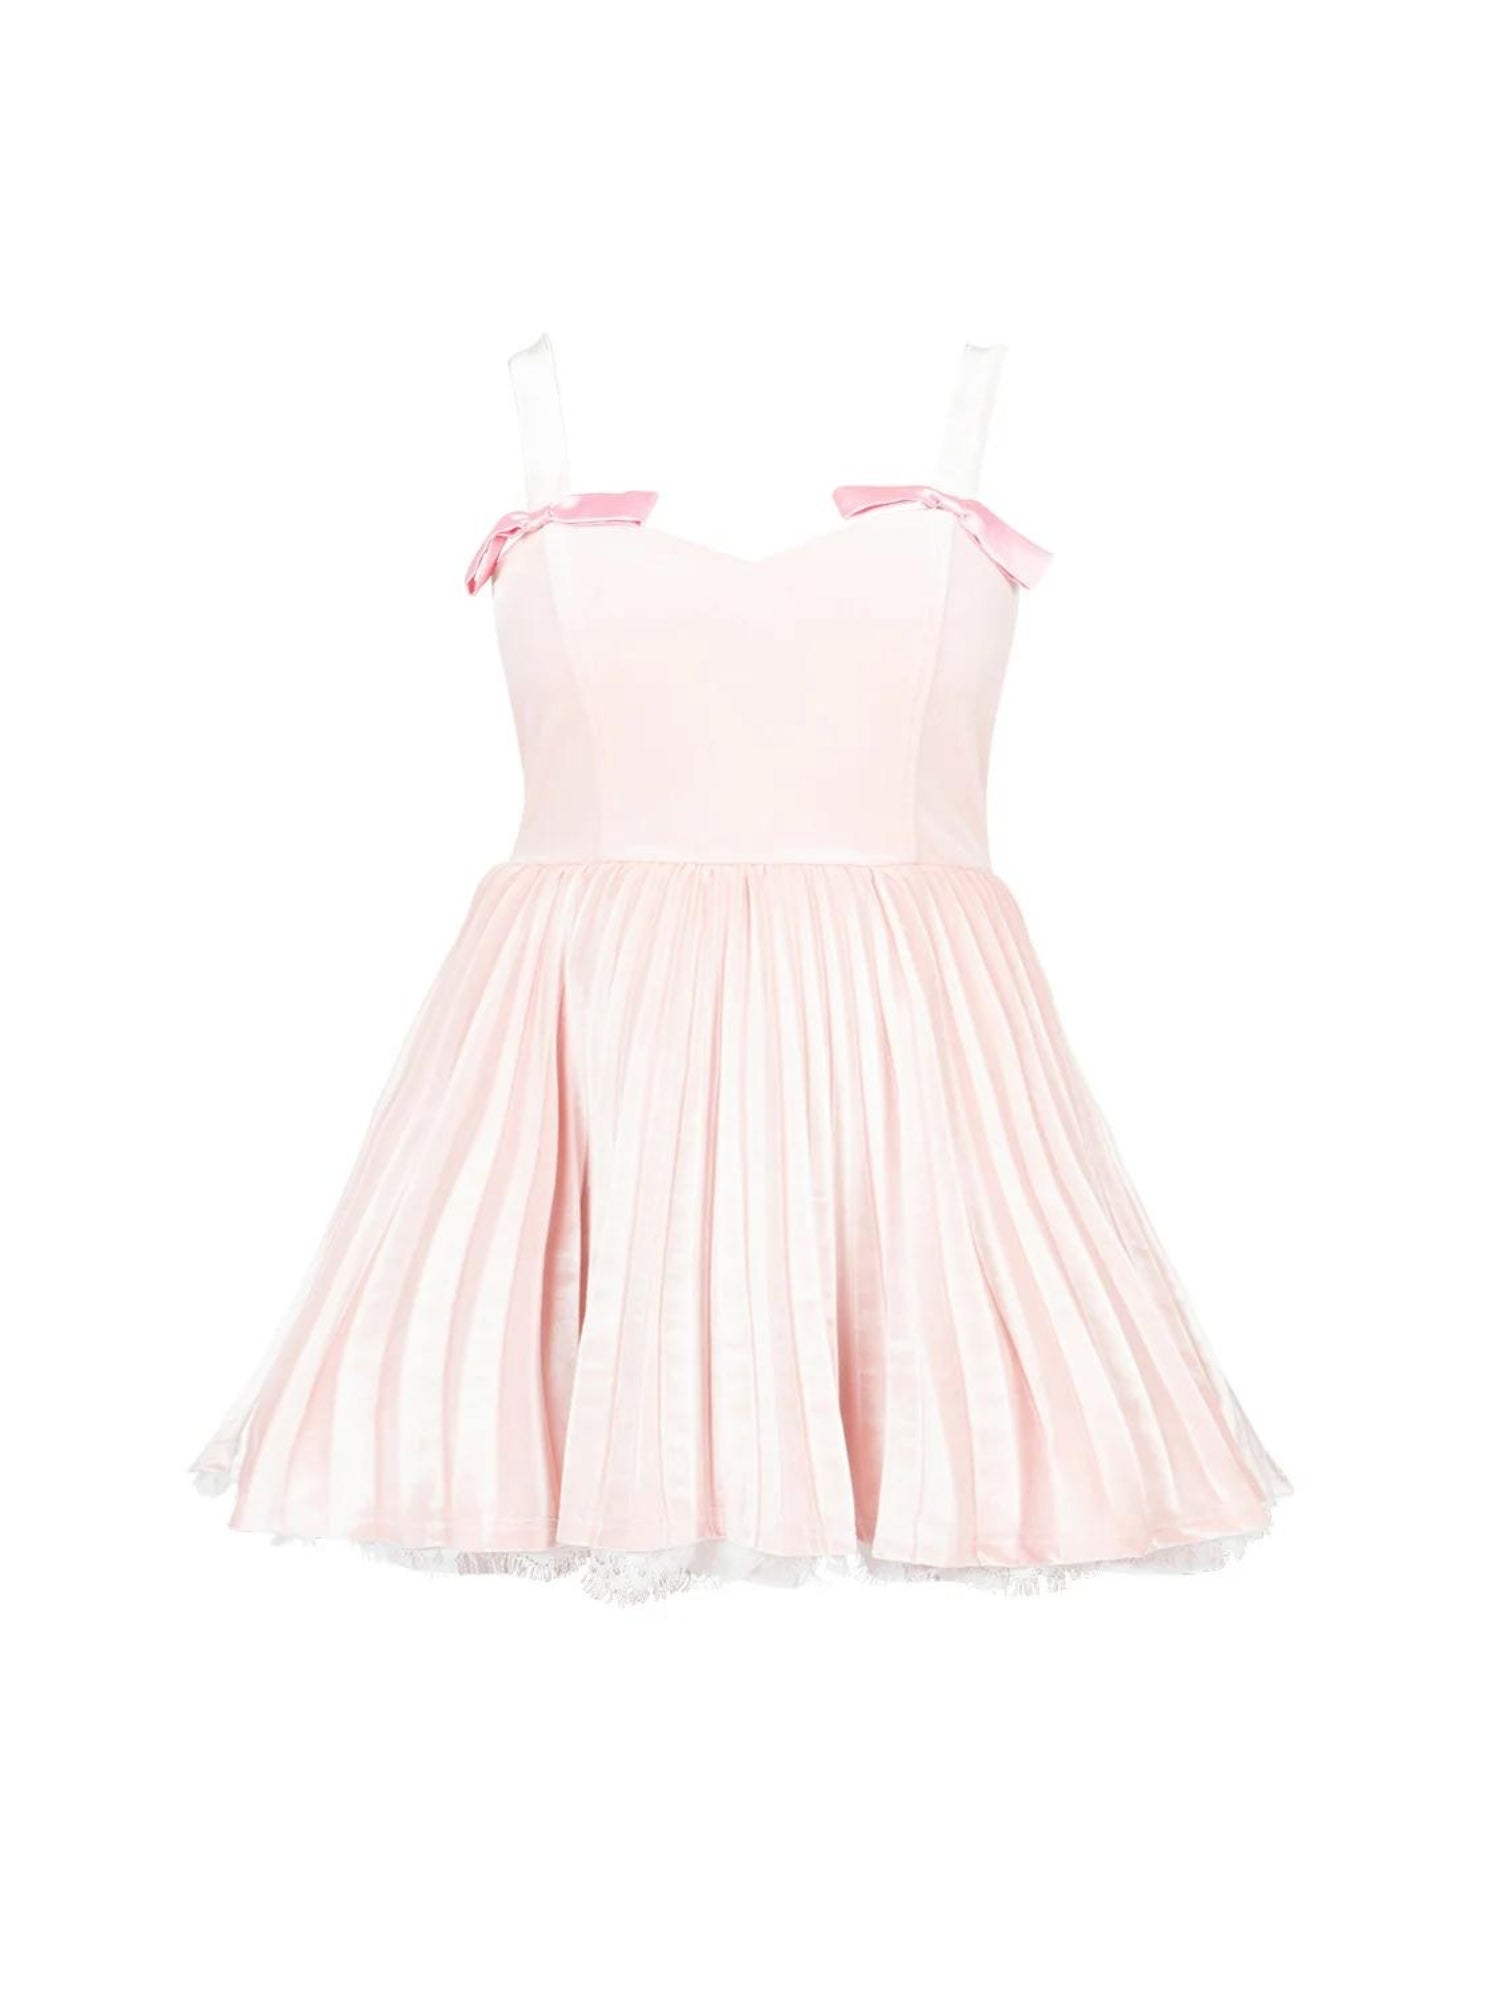 The Adorable Dress - The name says it all!!! The Adorable Dress by Serpenti Apparel is the sweetest dress you need for this coming season! Made of a ballerina pink velvet, the Adorable dress features pink satin bows on the straps, a pleated skirt, and whi